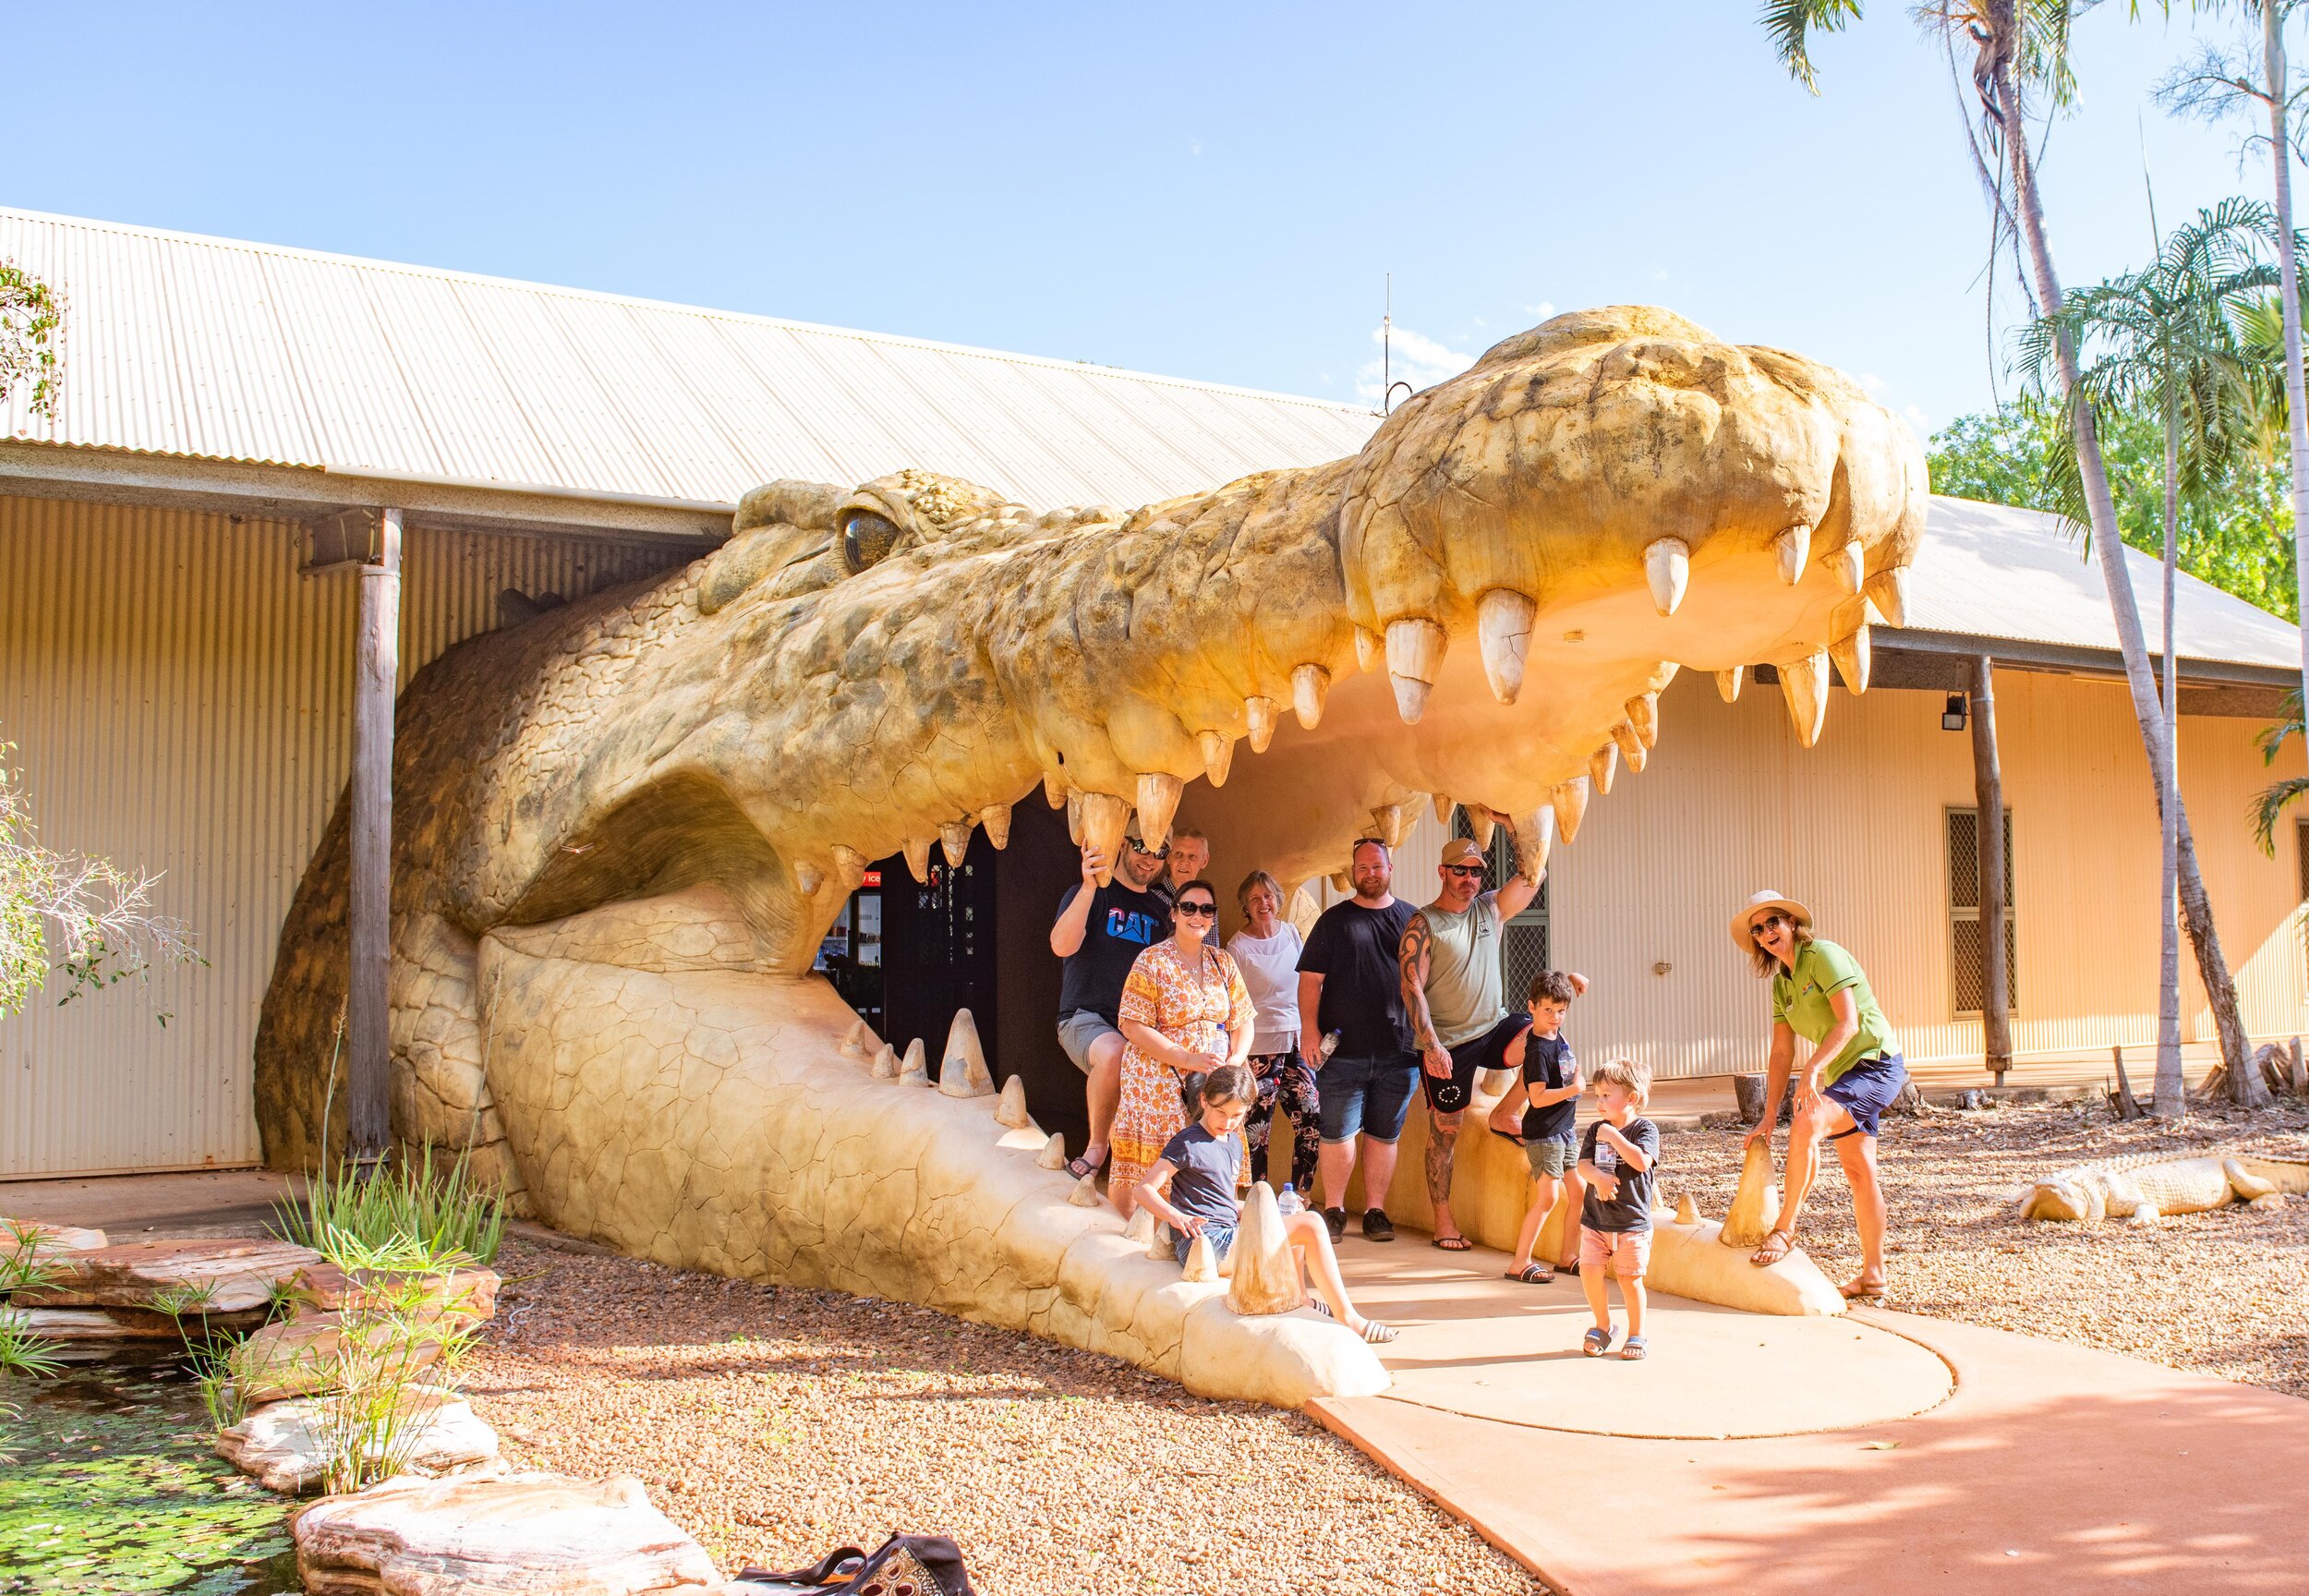 Group Family Malcolm Douglas Crocodile Park Broome and Around 3 in 1 Tour Things to do in Broome.jpg